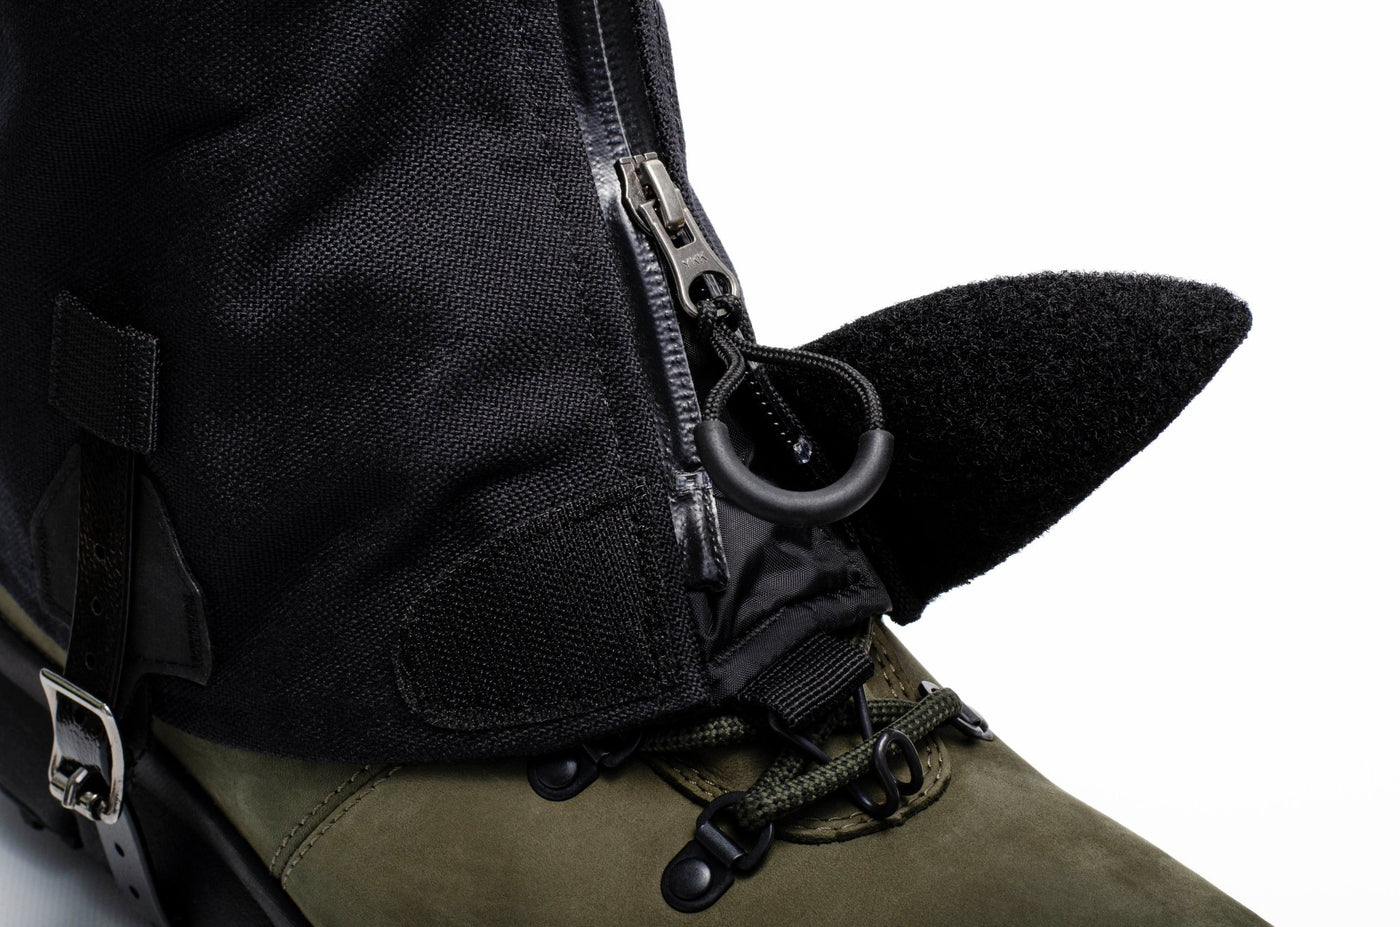 Close up of the zipper, velcro closure, and lace hook at the base of the gaiter